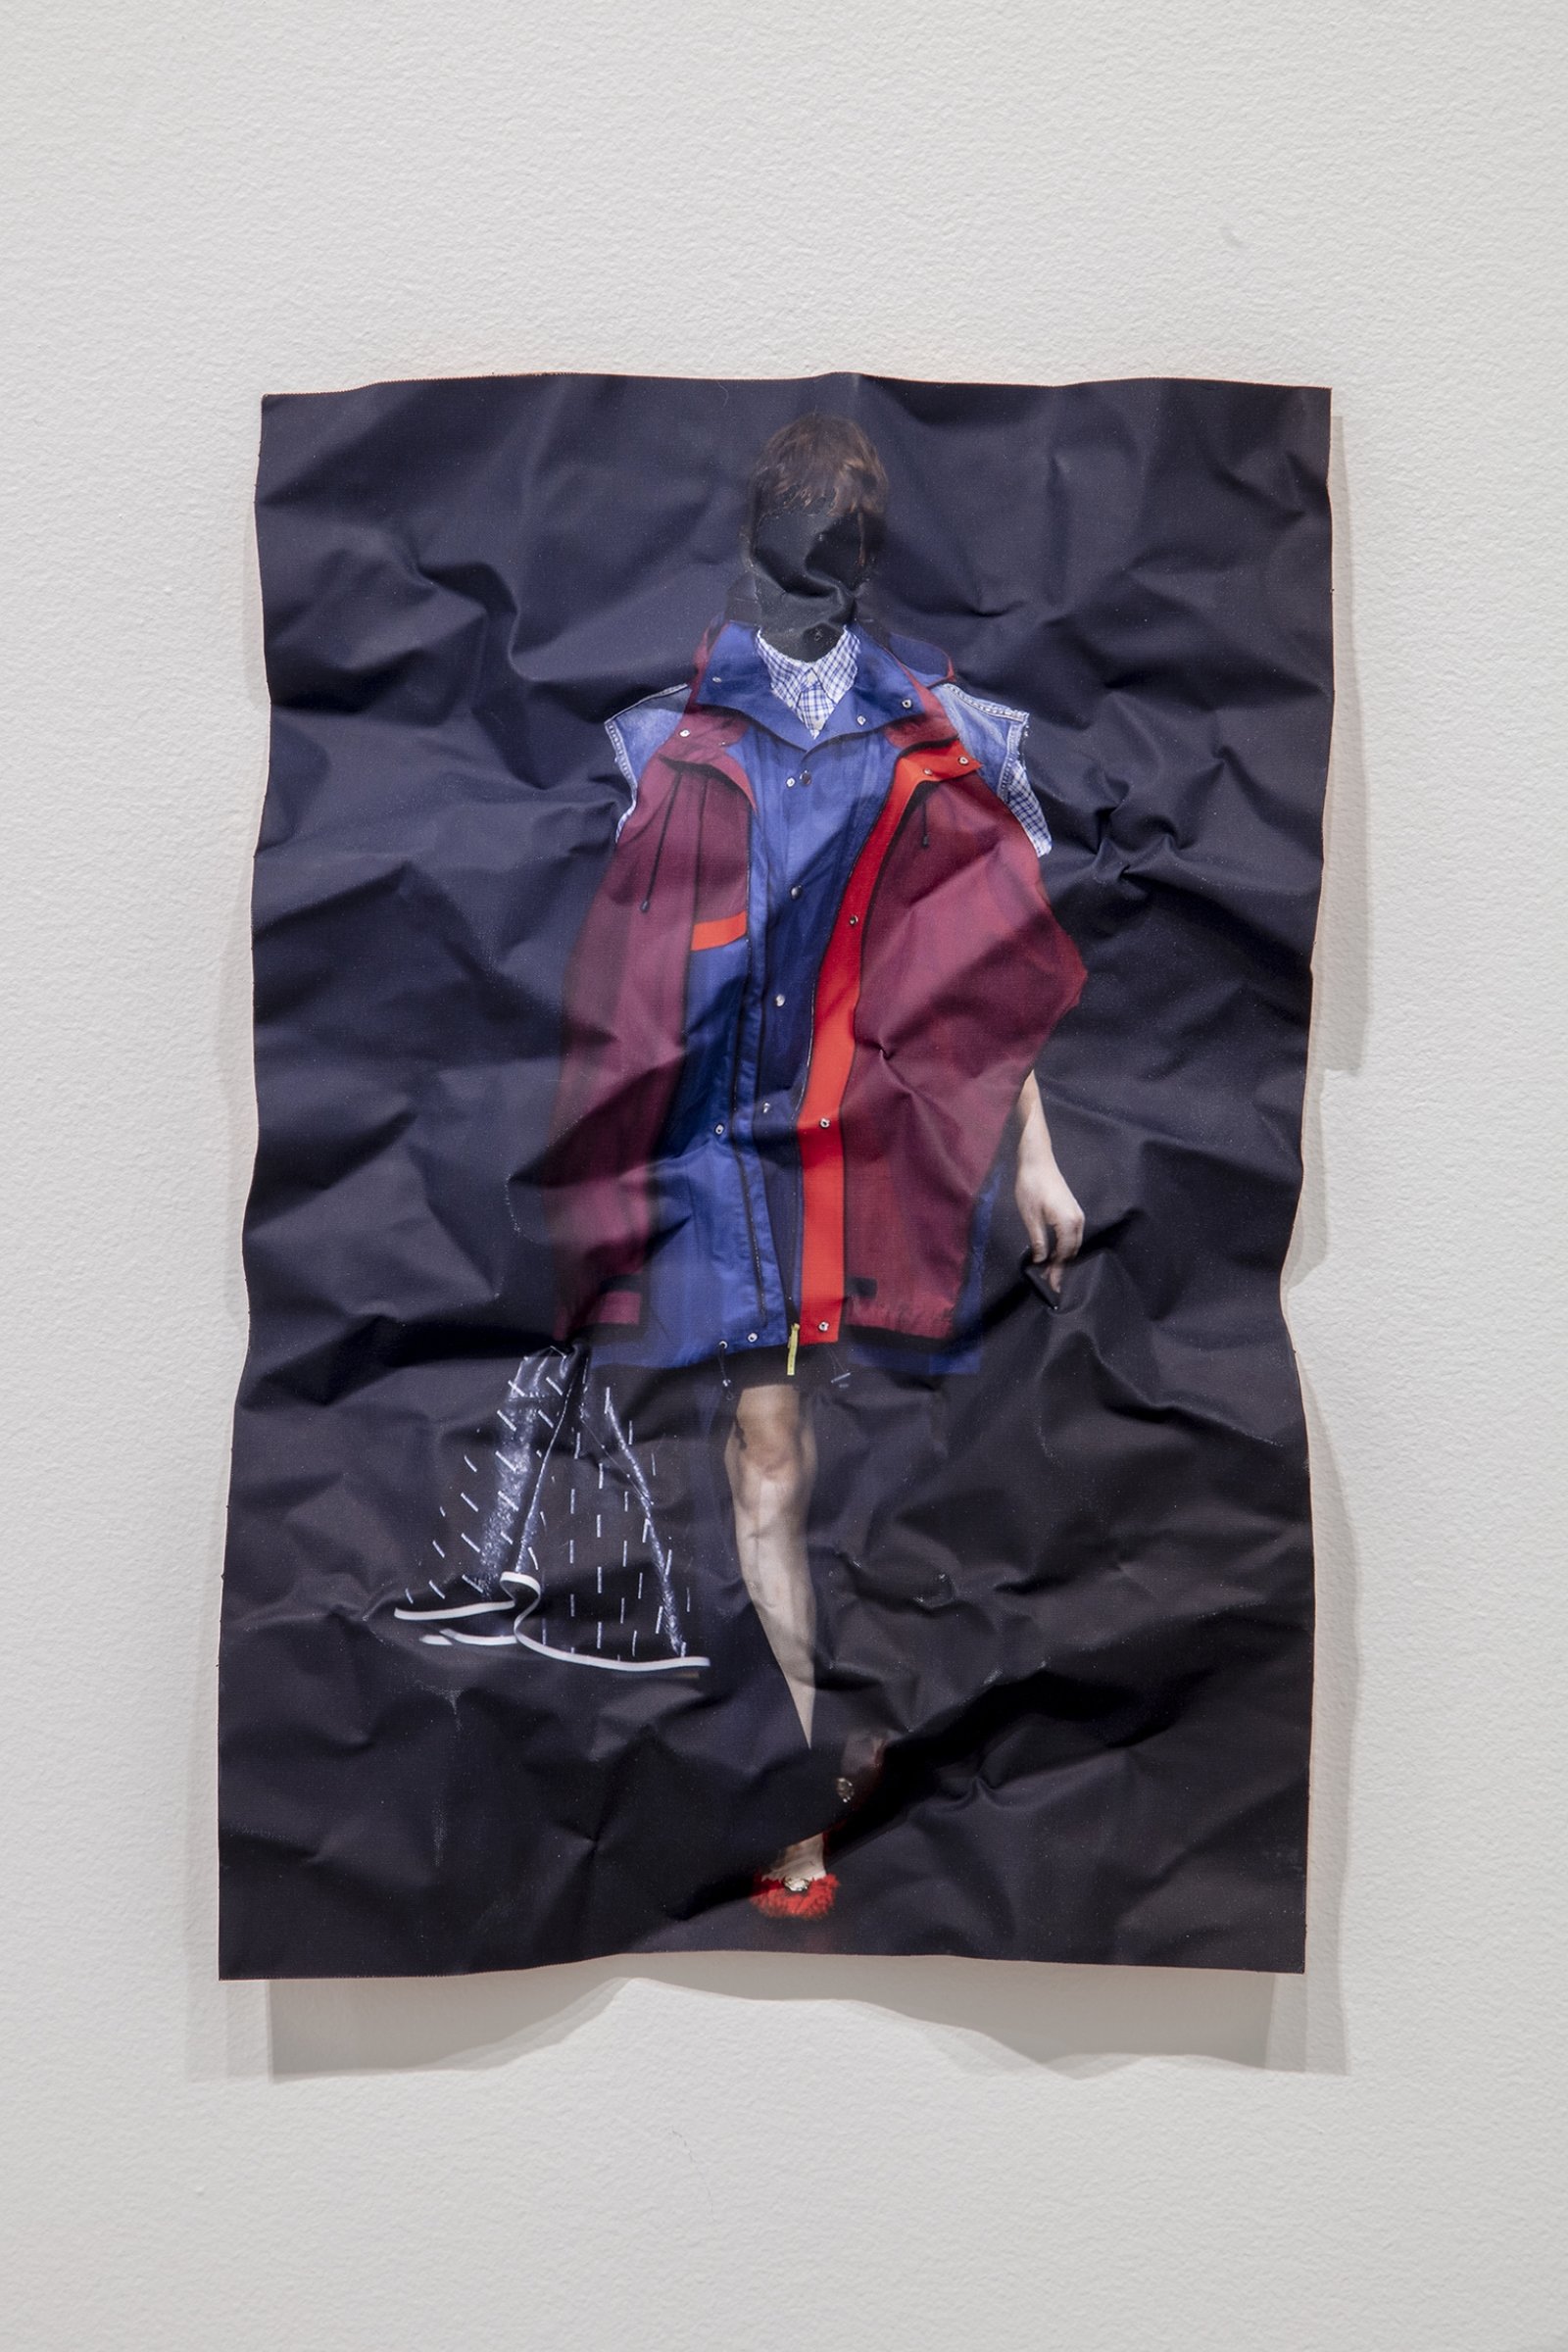 Valérie Blass, So what are your skills?, 2019, pvc pipes, heat-shrink tubing, paint, copper, inkjet print on polyester, 40 x 11 x 12 in. (100 x 27 x 30 cm), 11 x 9 x 1 in. (28 x 23 x 3 cm). Installation view, Le parlement des invisibles, Art Gallery of Ontario, Toronto, Canada, 2019